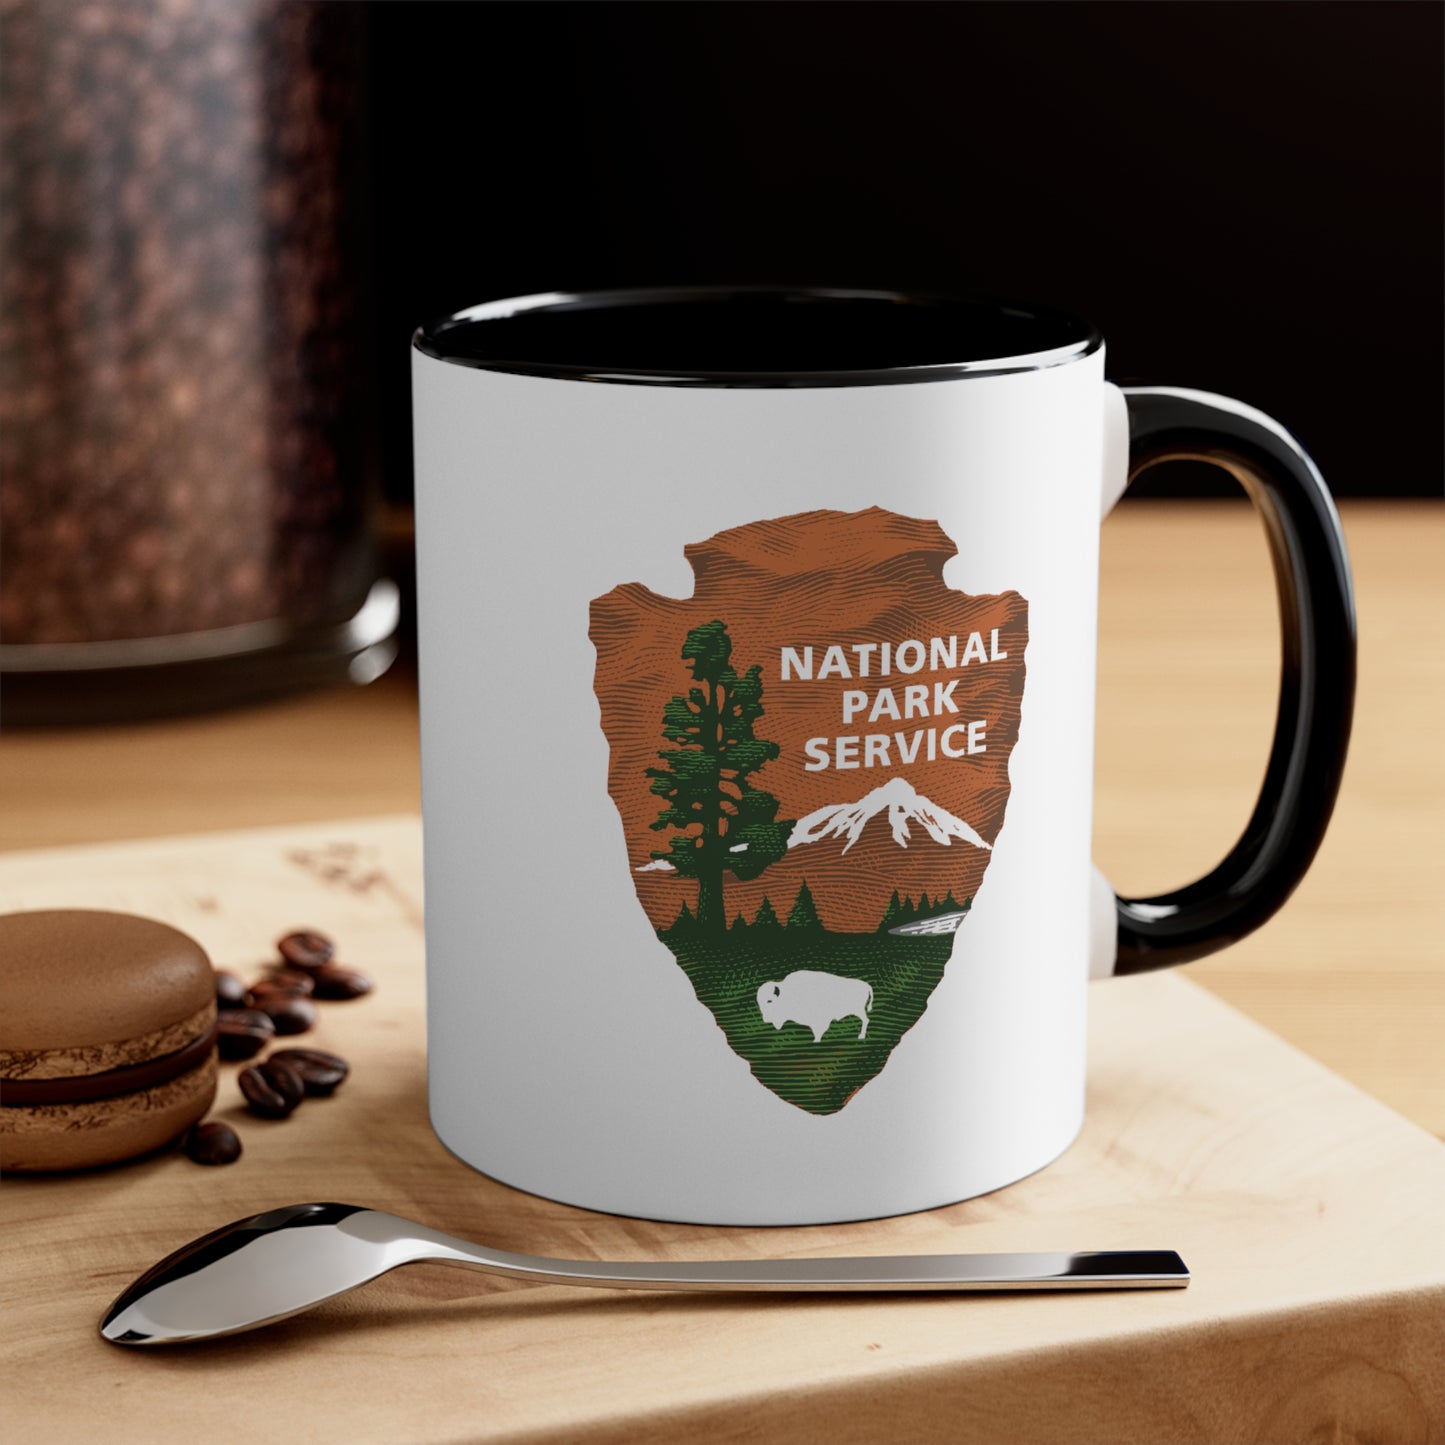 National Park Service Coffee Mugs - Double Sided Black Accent White Ceramic 11oz by TheGlassyLass